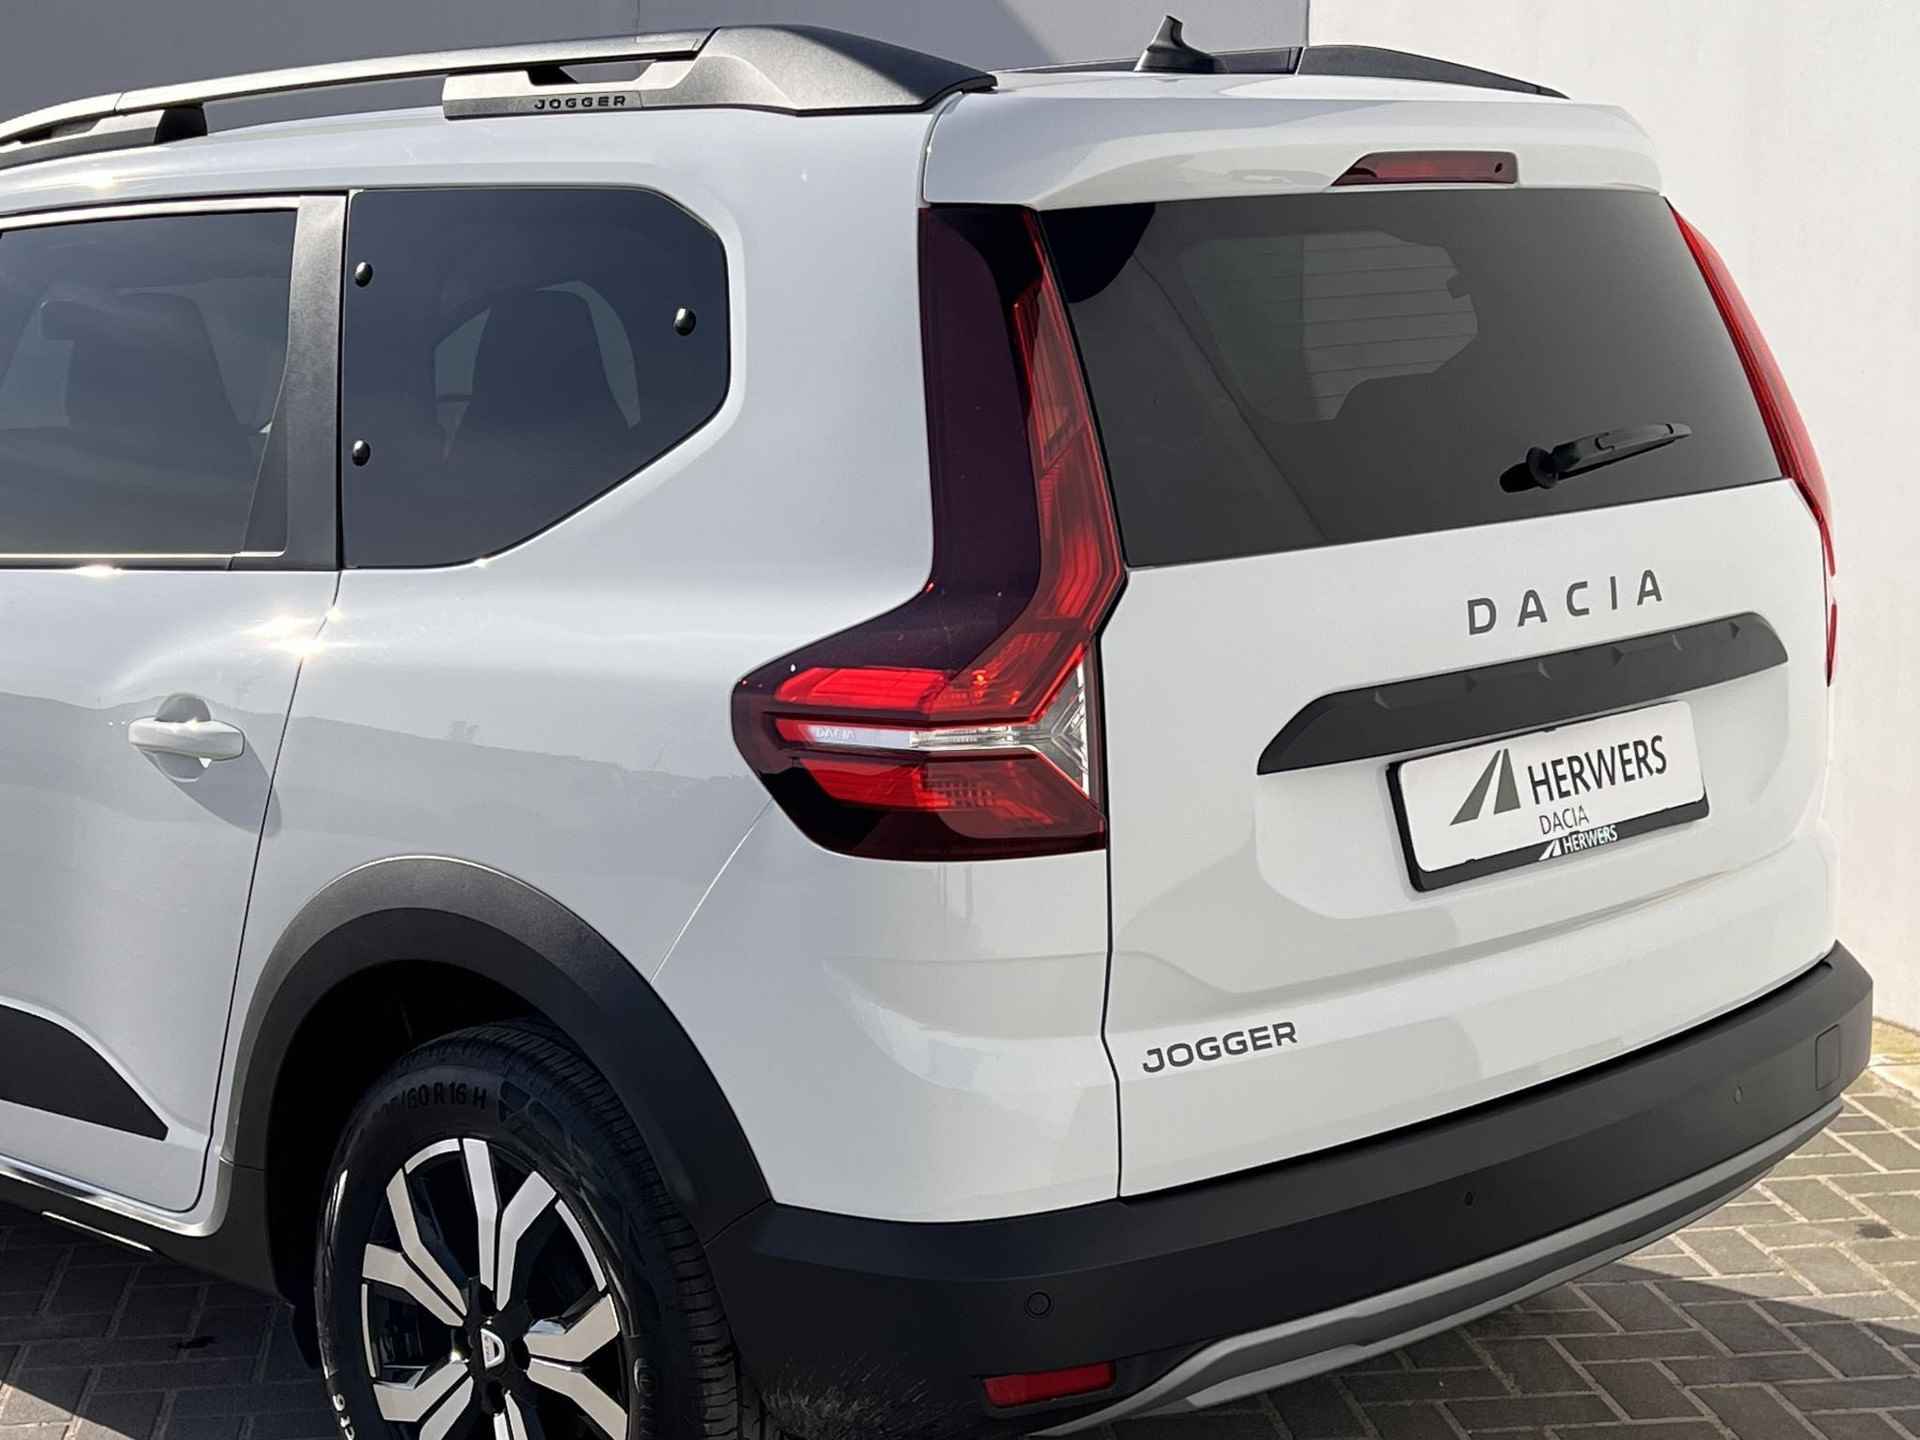 Dacia Jogger 1.0 TCe 110 Extreme 7p. / Zeven persoons / Navigatie via Apple Carplay of Android Auto / Stoelverwarming / - 49/49